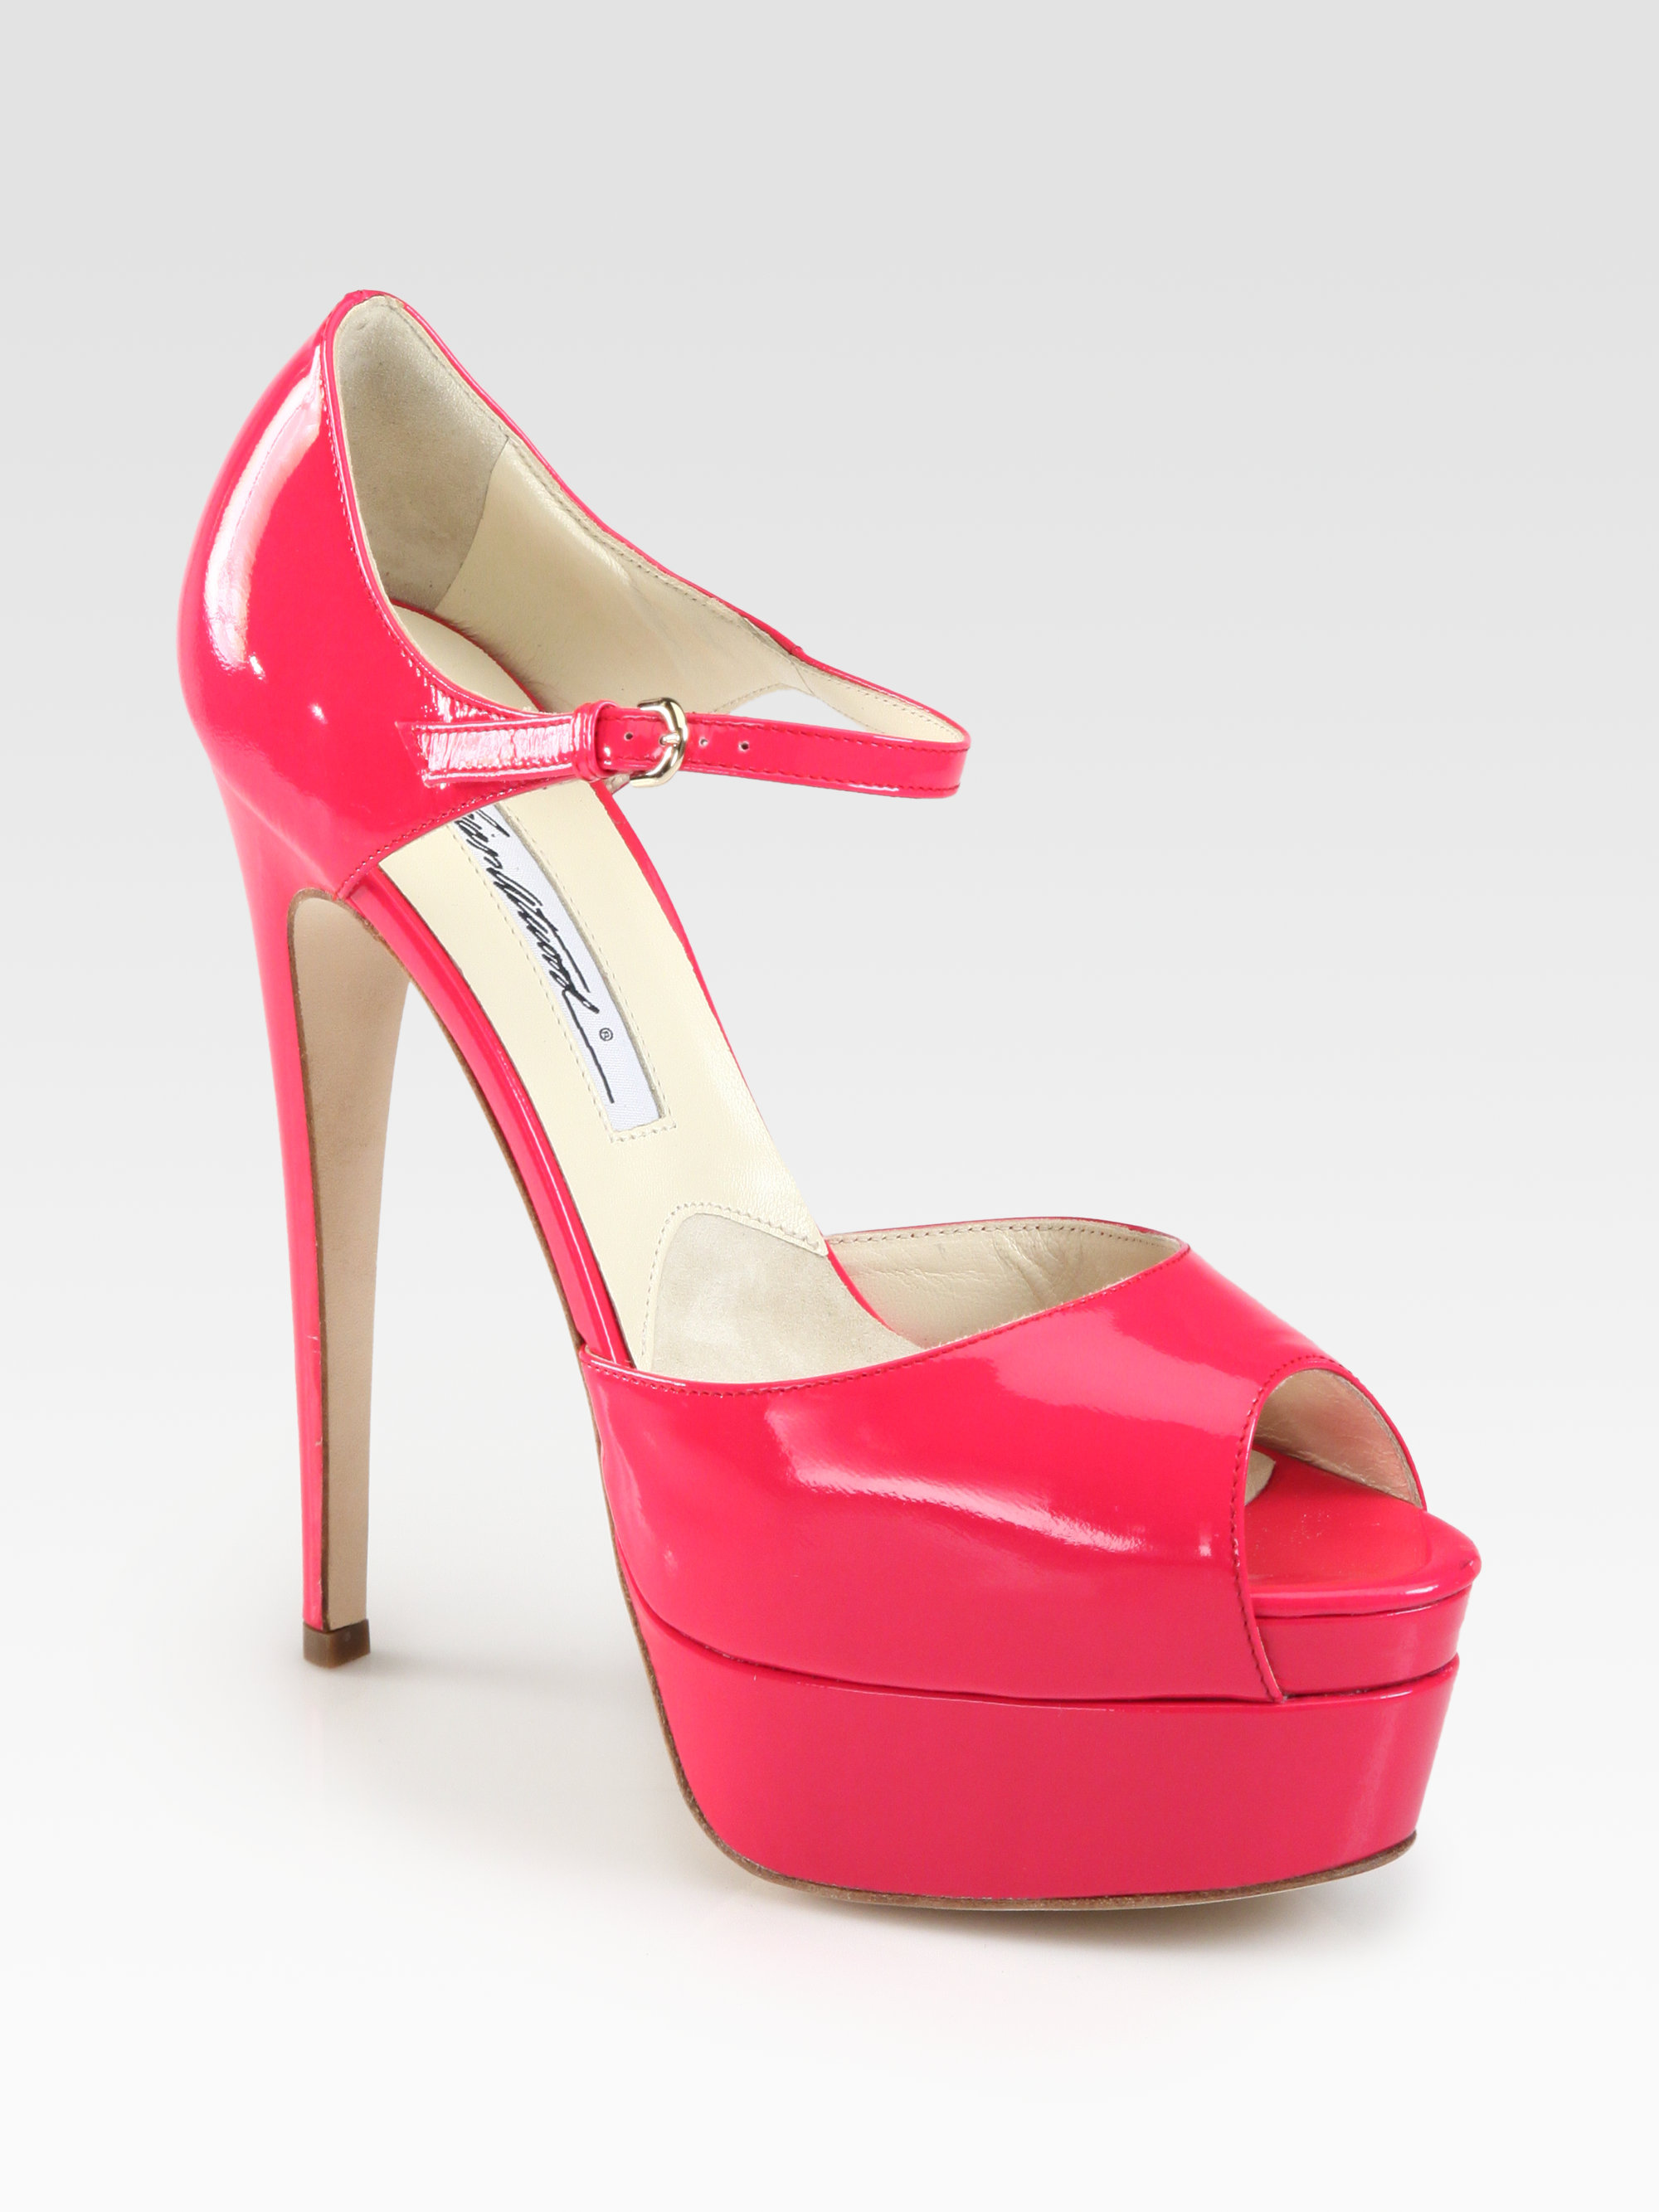 Lyst - Brian Atwood Tribeca Patent Leather Platform Sandals